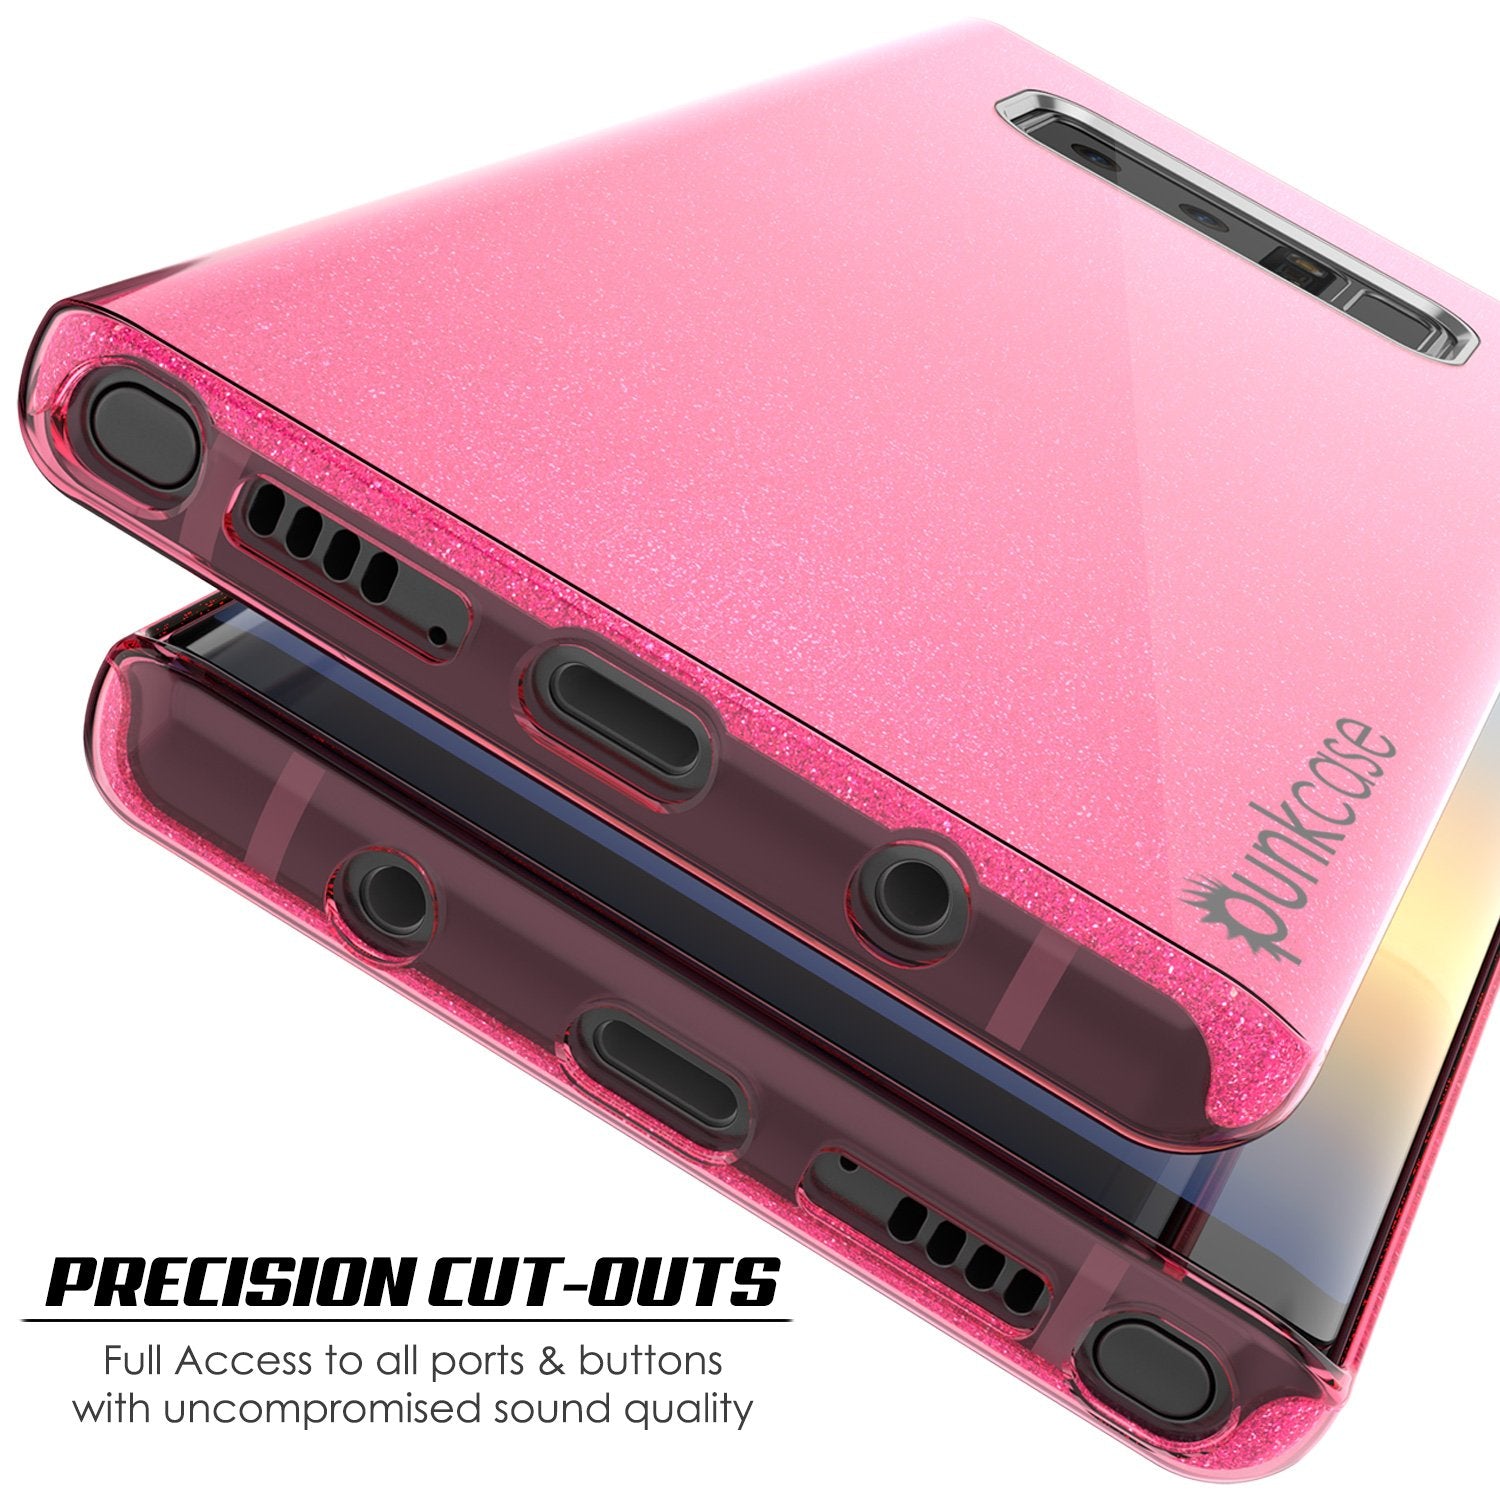 Galaxy Note 8 Case, Punkcase Galactic 2.0 Series Ultra Slim Protective Armor [Pink] - PunkCase NZ